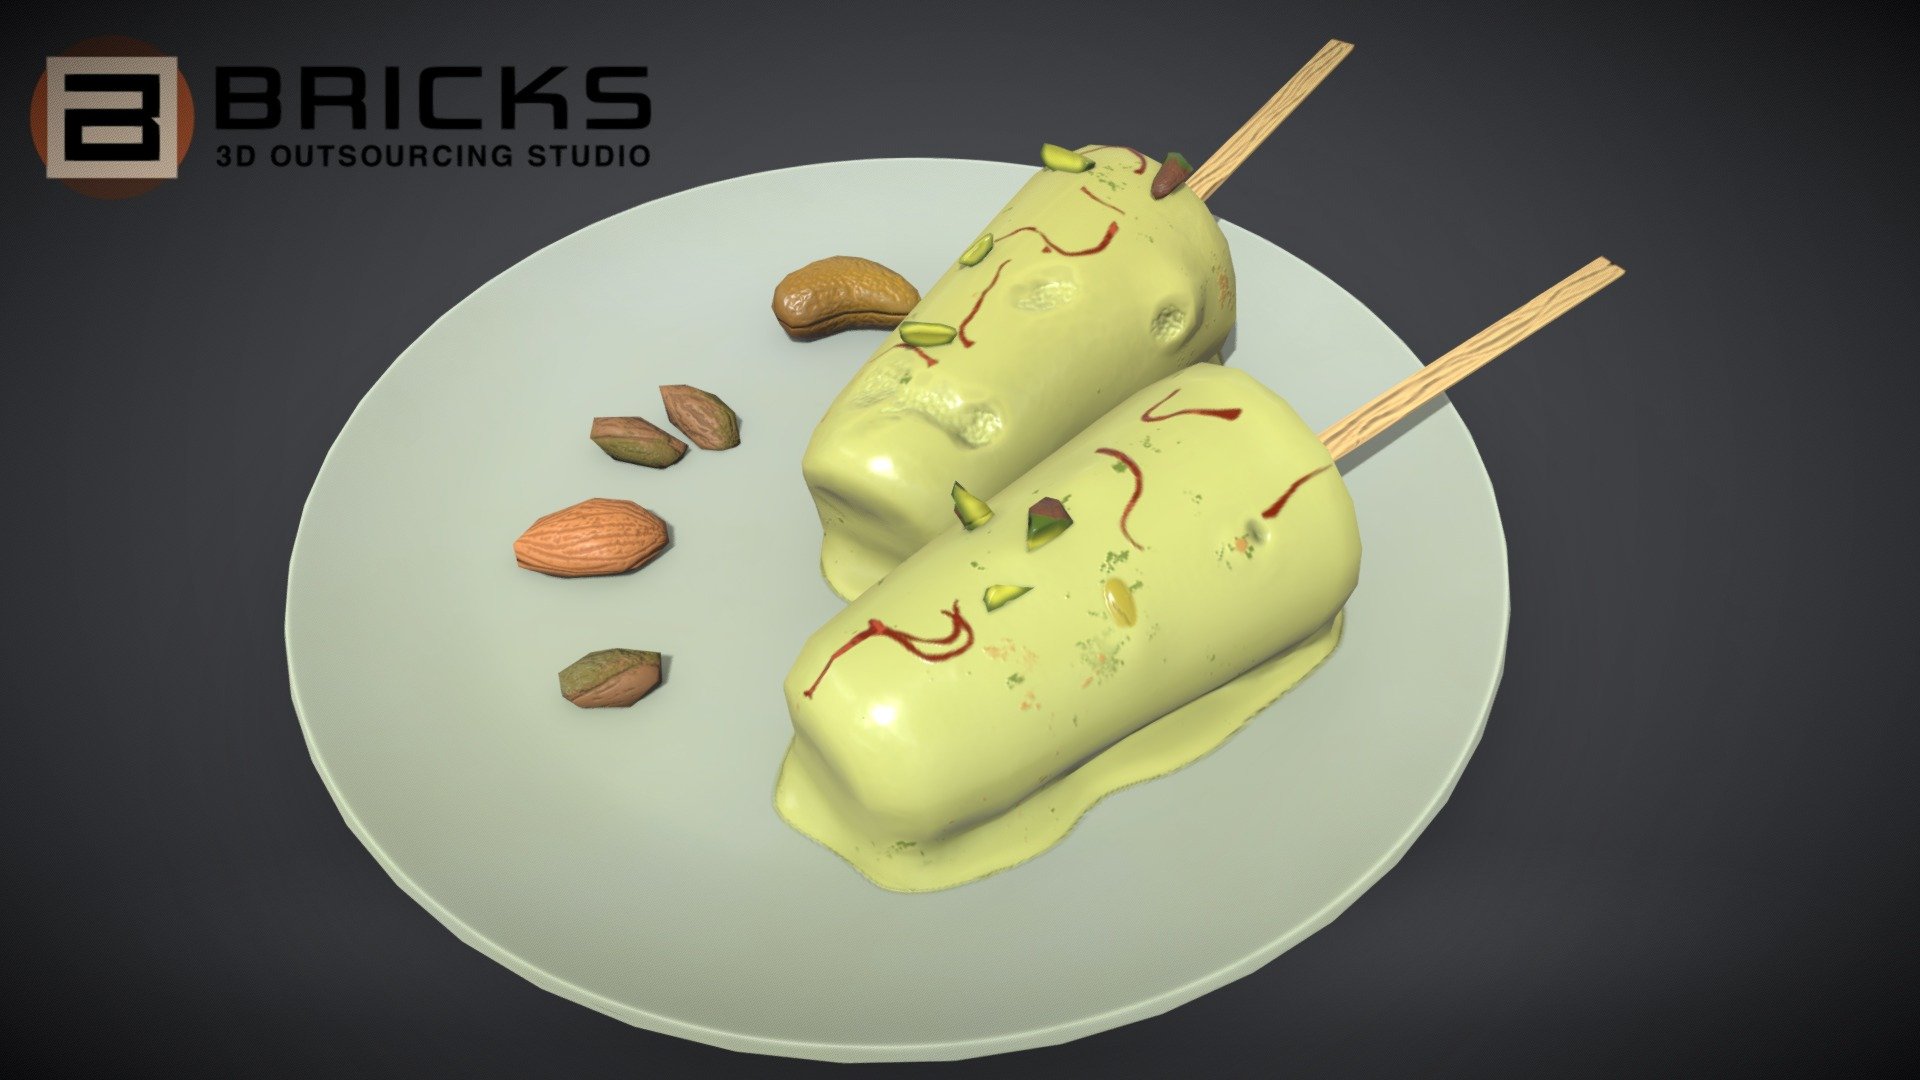 PBR Food Asset:
Kulfi
Polycount: 1930
Vertex count: 1007
Texture Size: 1024px x 1024px
Normal: OpenGL

If you need any adjust in file please contact us: team@bricks3dstudio.com

Hire us: tringuyen@bricks3dstudio.com
Here is us: https://www.bricks3dstudio.com/
        https://www.artstation.com/bricksstudio
        https://www.facebook.com/Bricks3dstudio/
        https://www.linkedin.com/in/bricks-studio-b10462252/ - Kulfi - Buy Royalty Free 3D model by Bricks Studio (@bricks3dstudio) 3d model